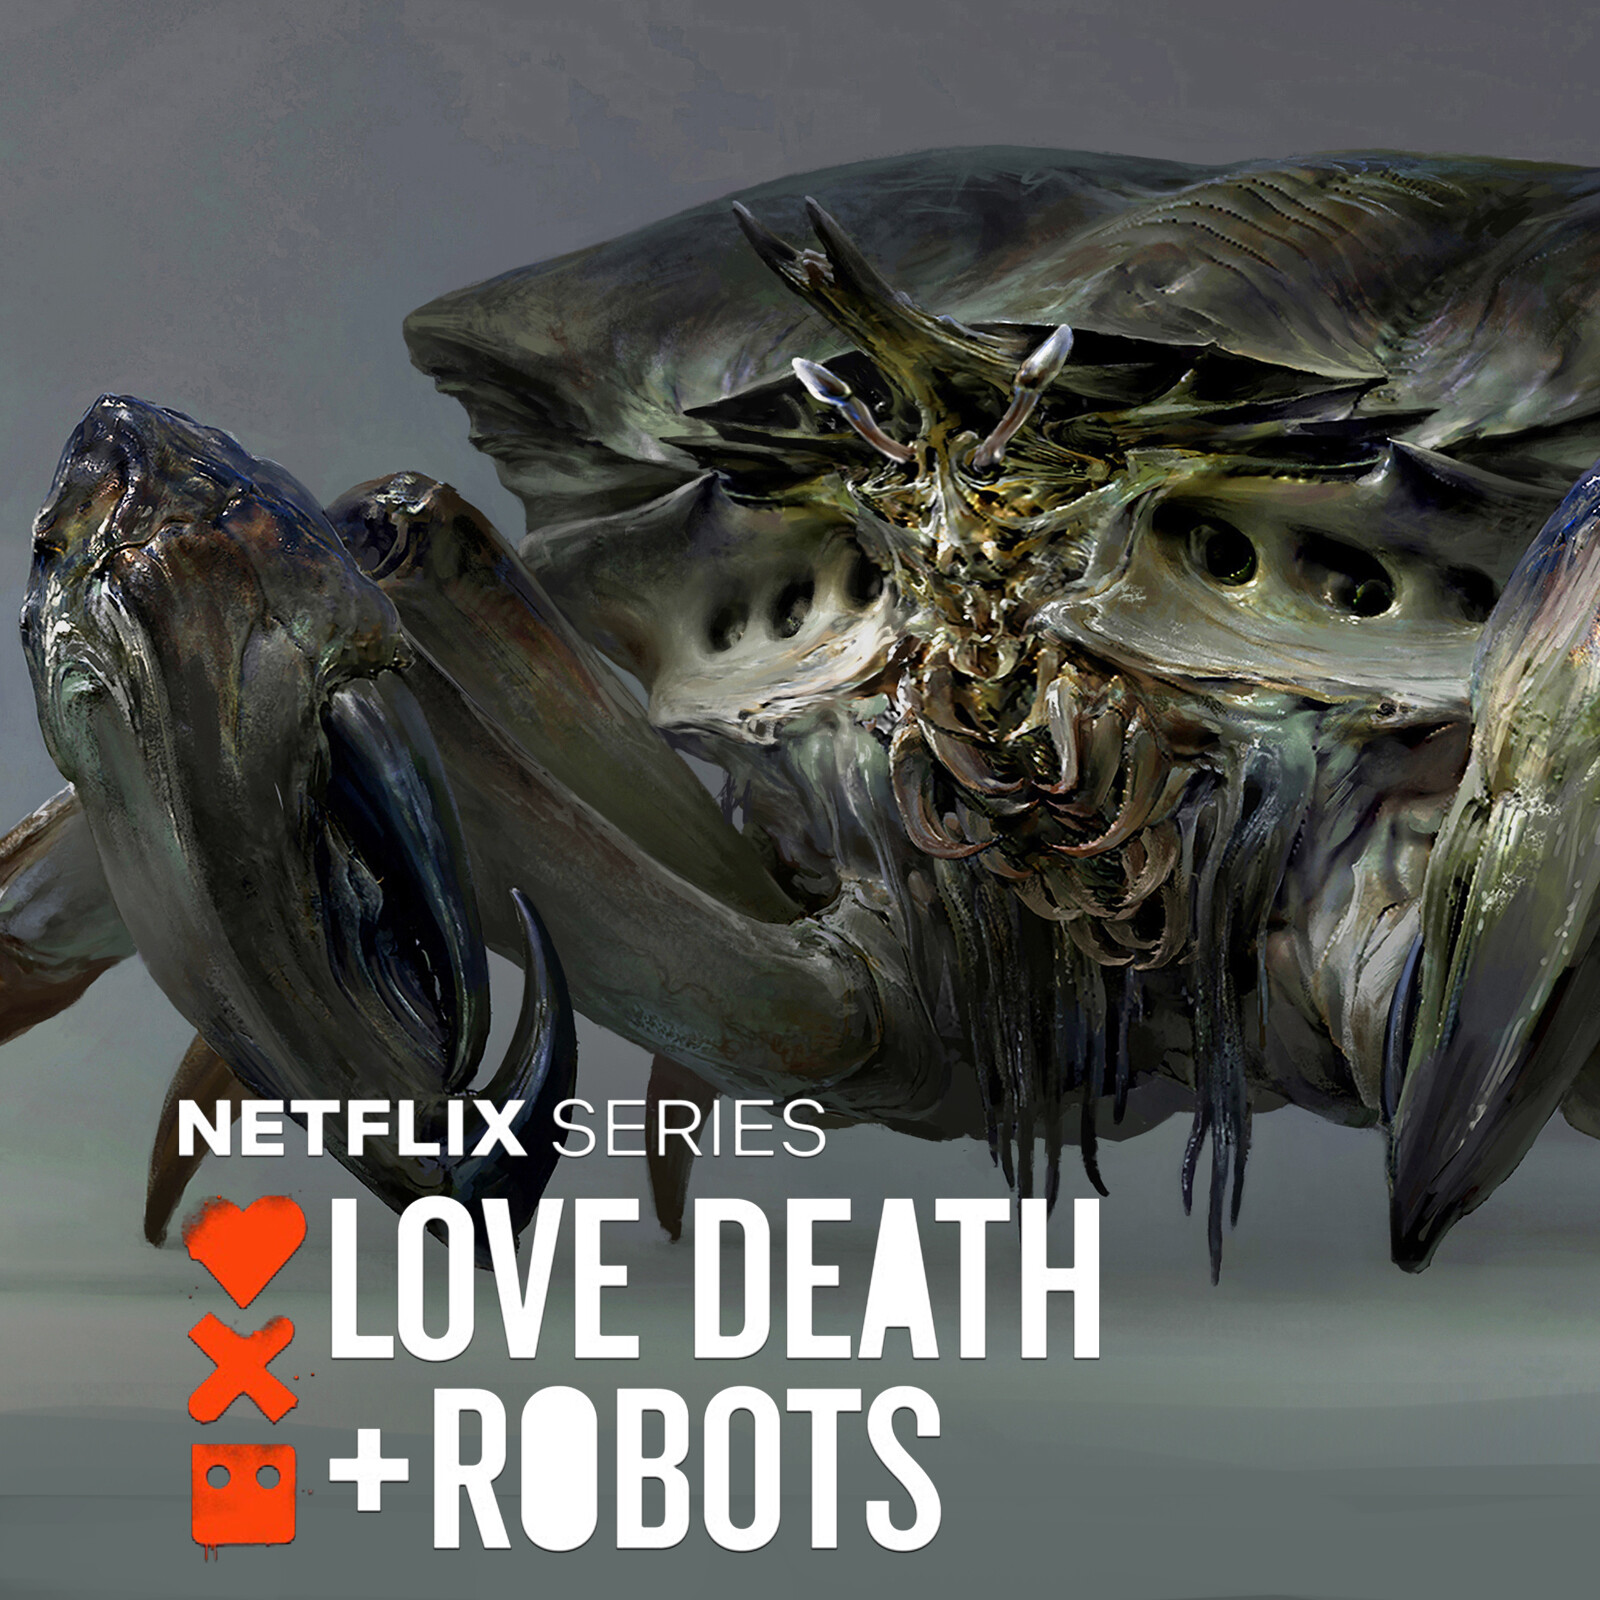 love death robots bad travelling meaning